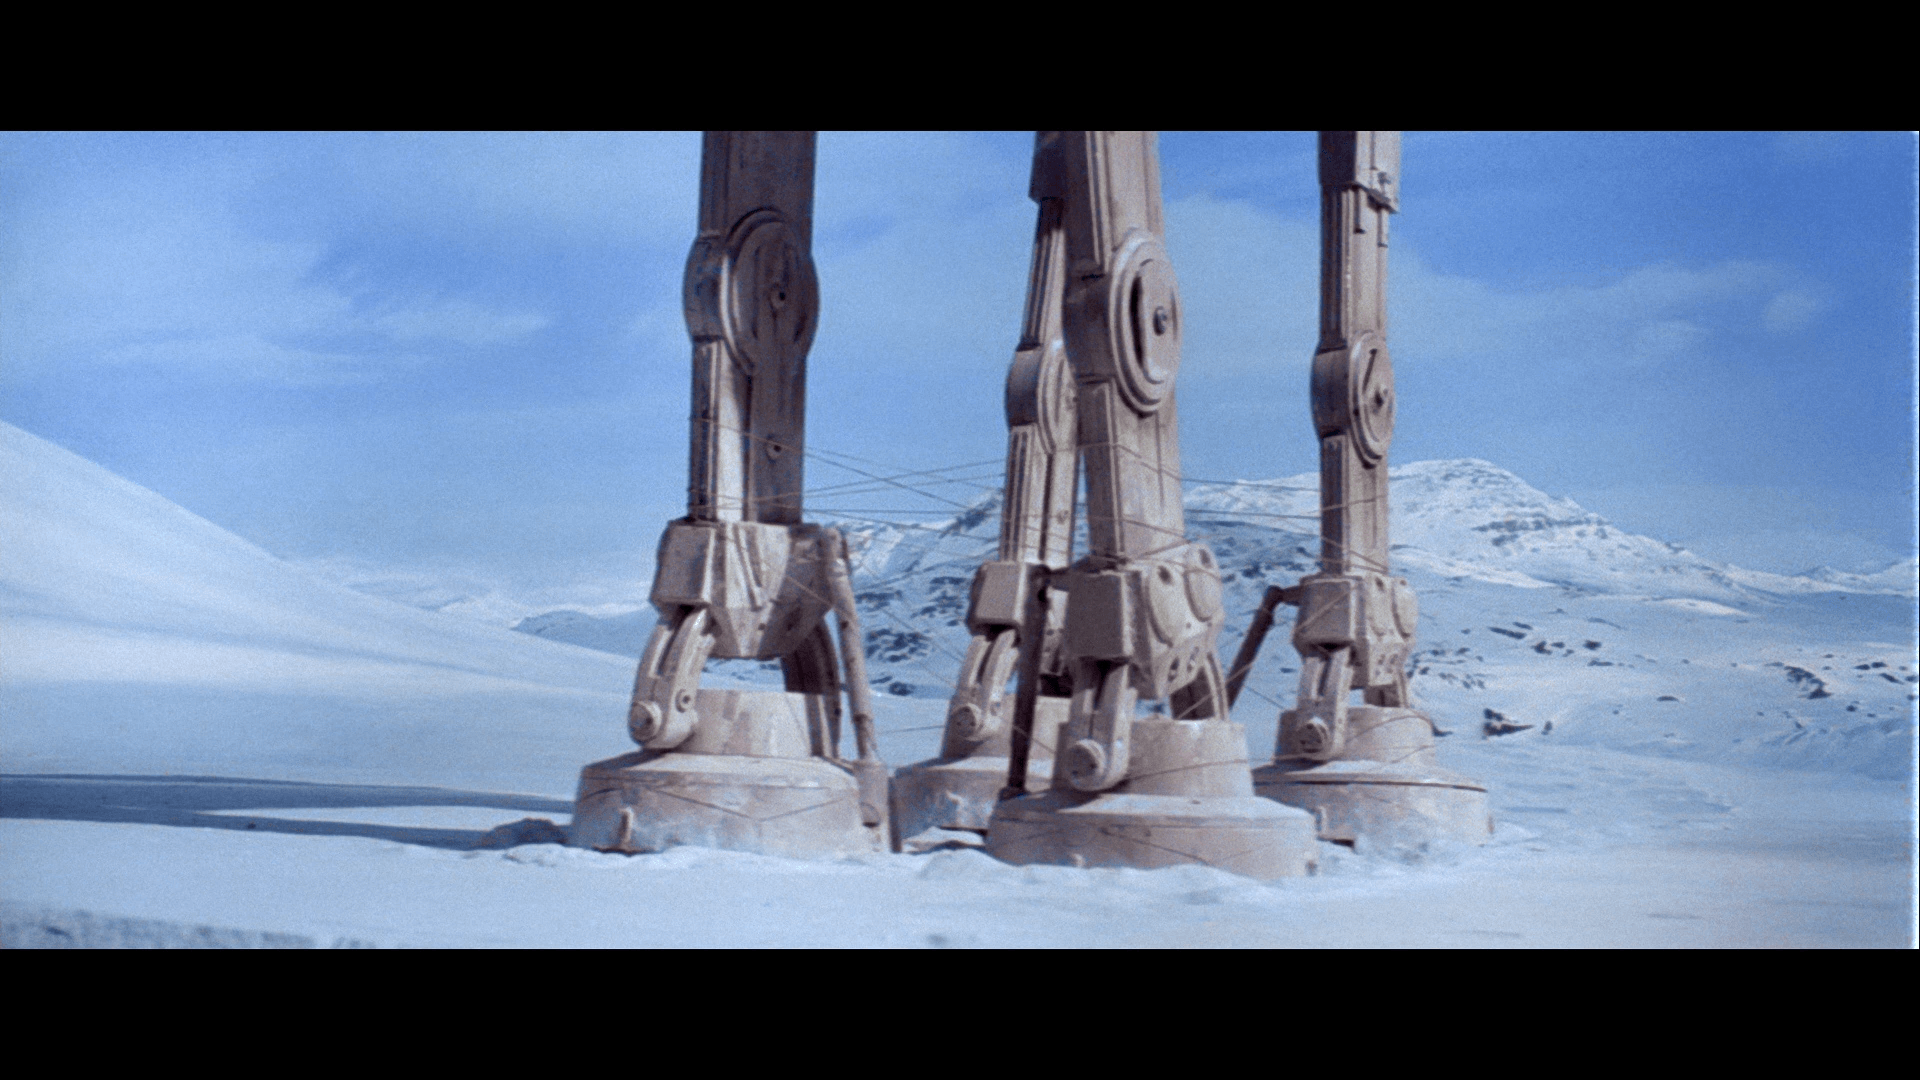 Star Wars Episode V: The Empire Strikes Back Full HD Wallpapers and